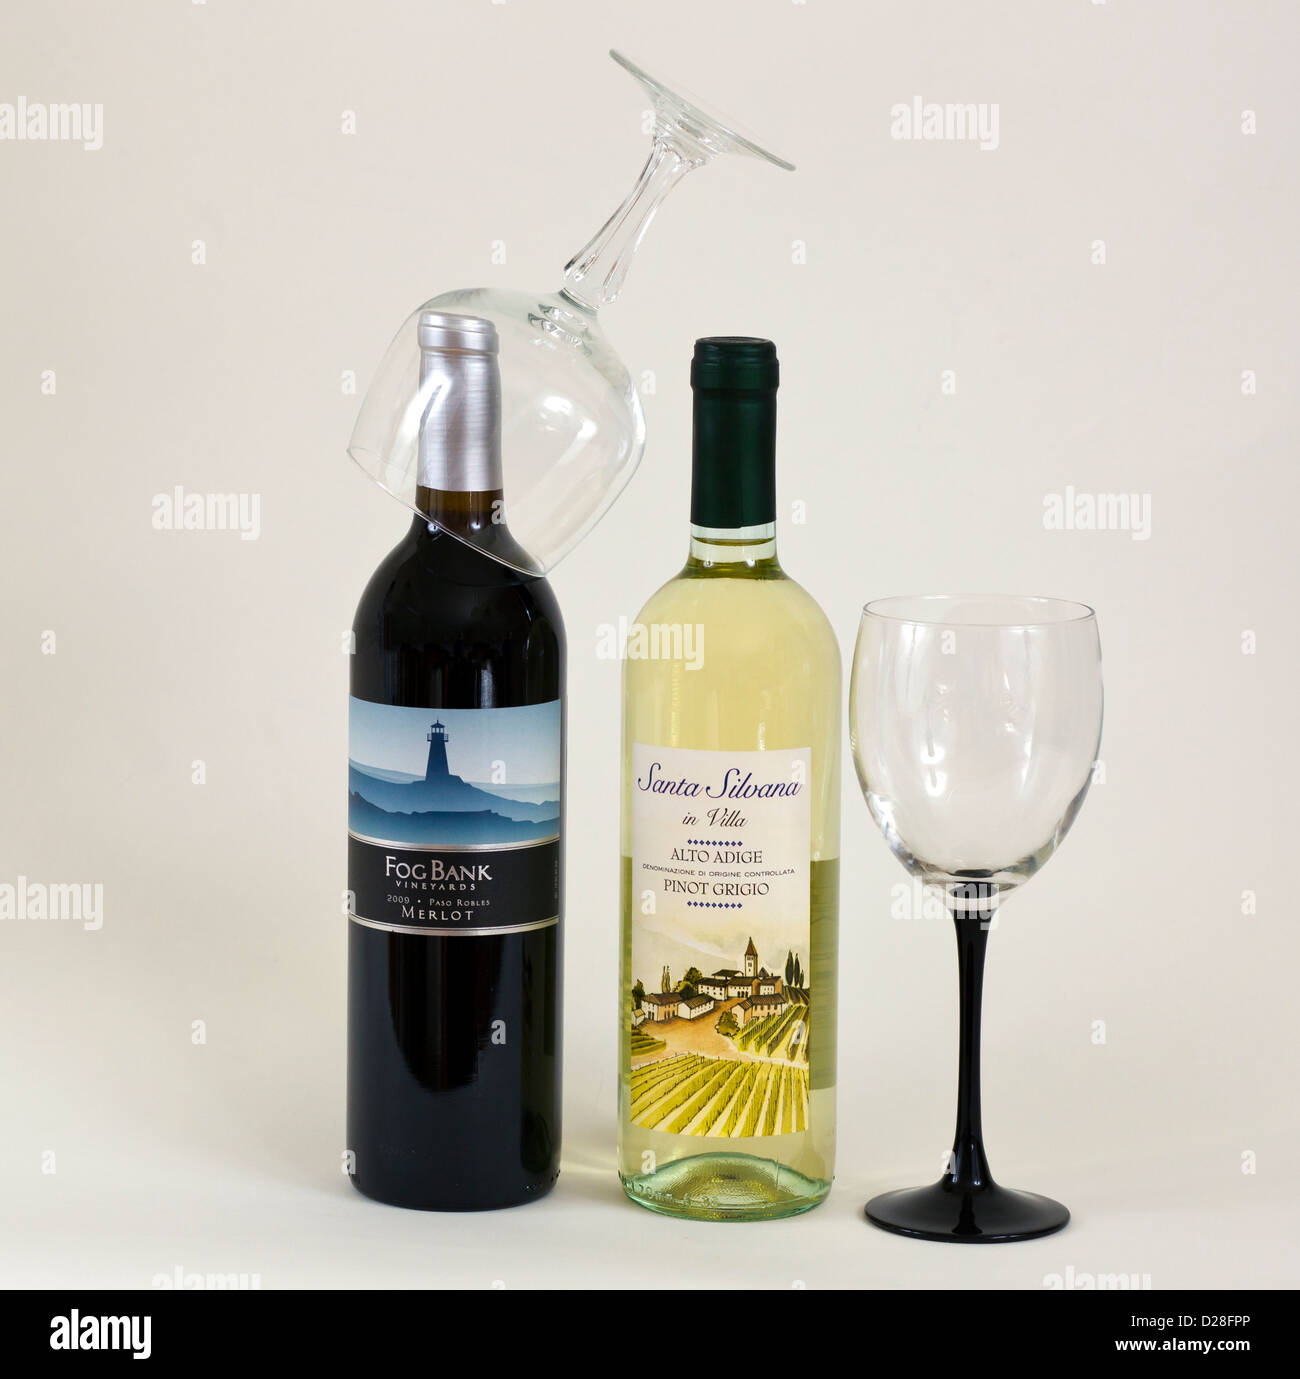 Two bottles of wine one white one red and two glasses. One glasses in upside down on the neck of the red wine. Stock Photo